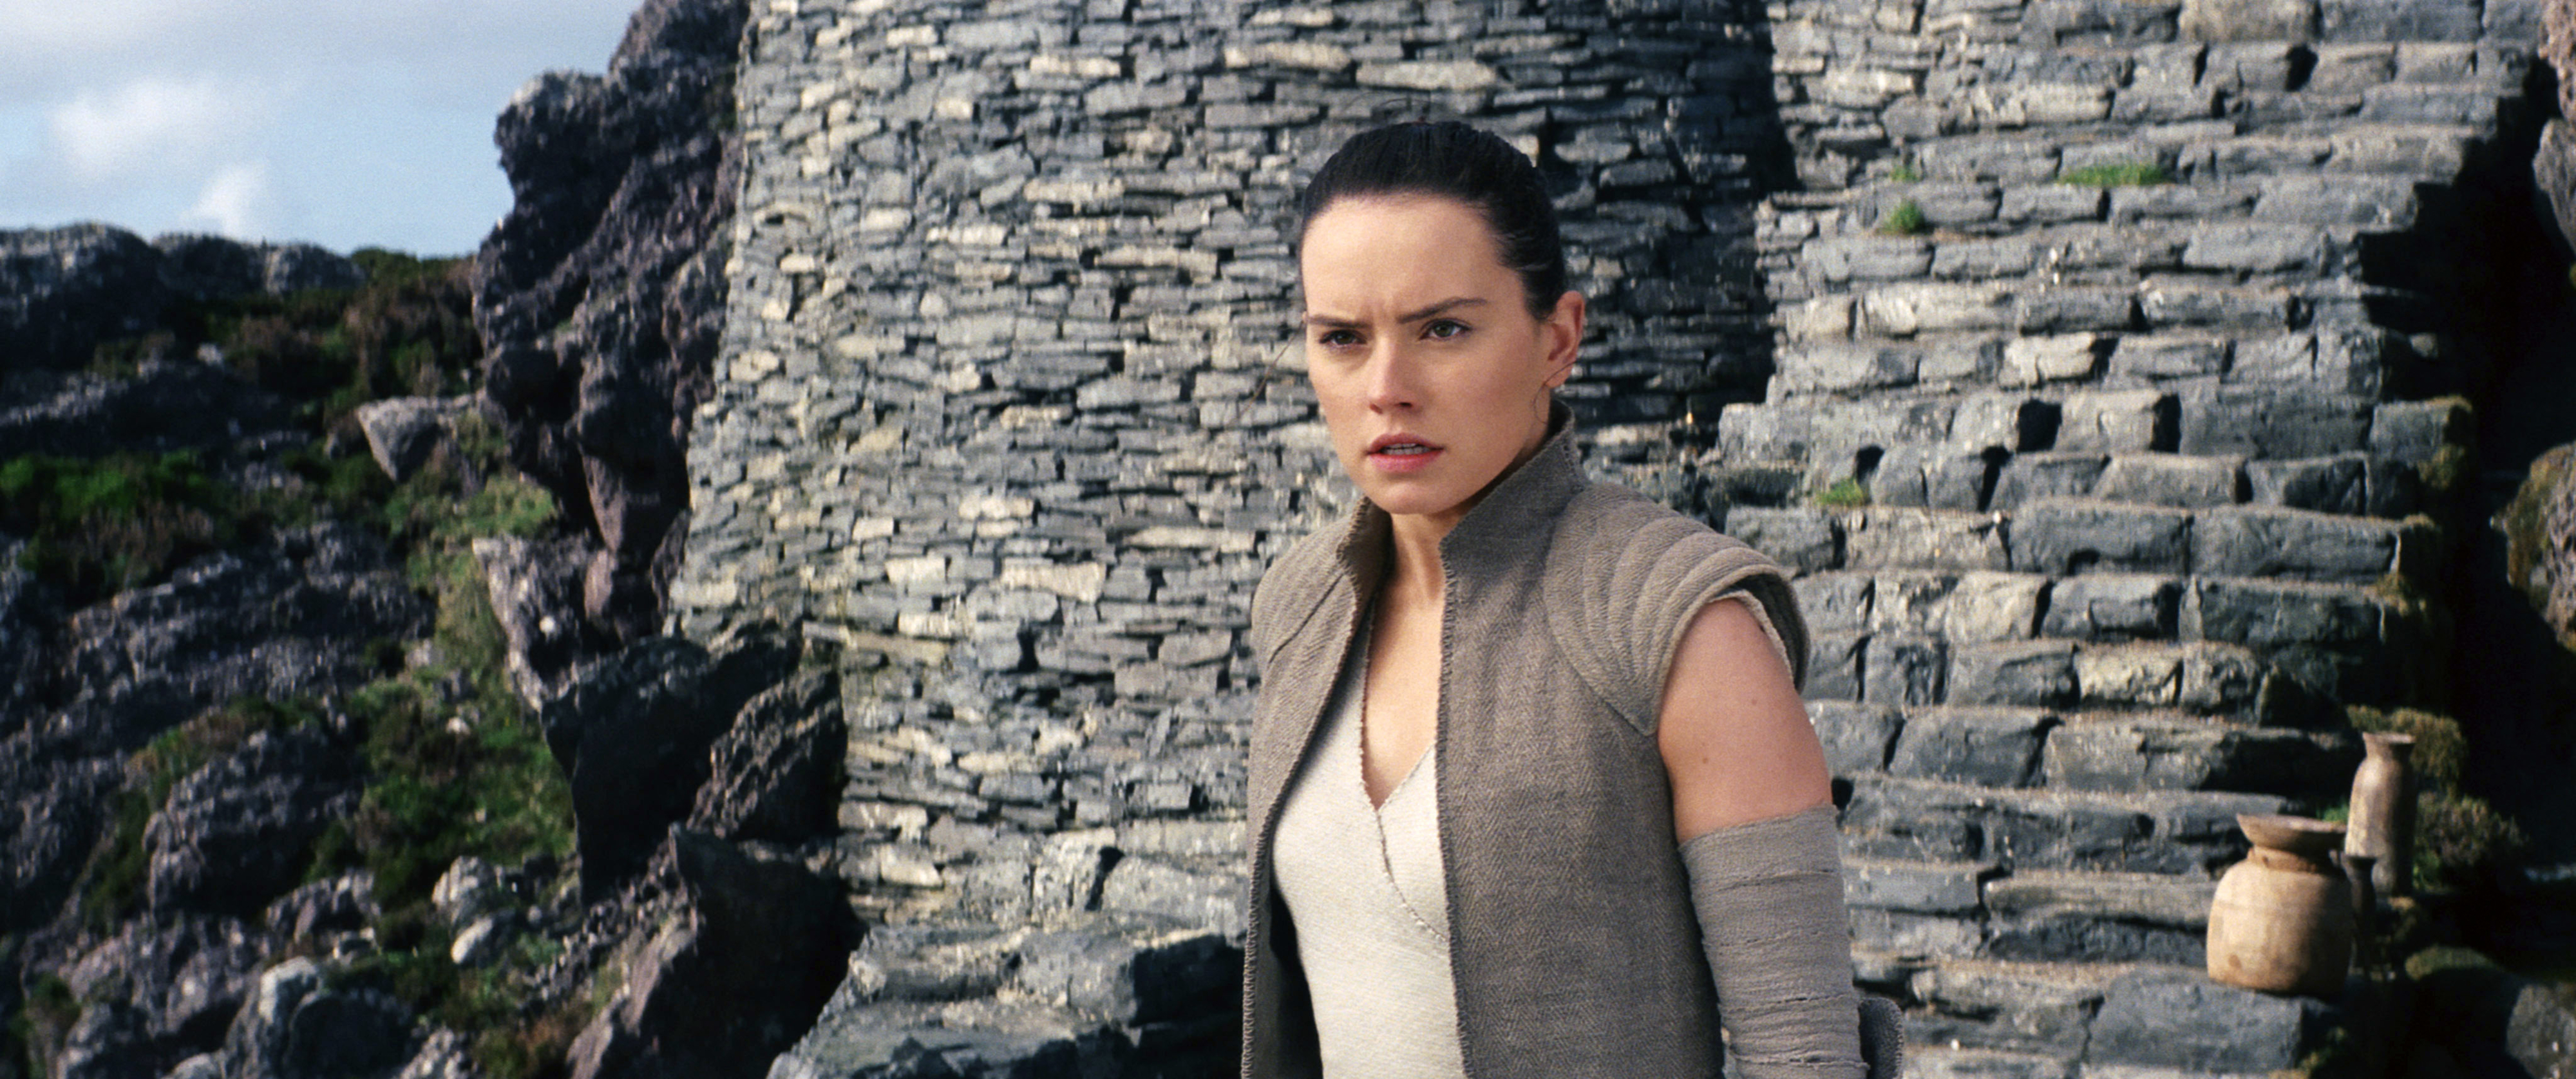 Rey from Star Wars stands in front of a stone wall